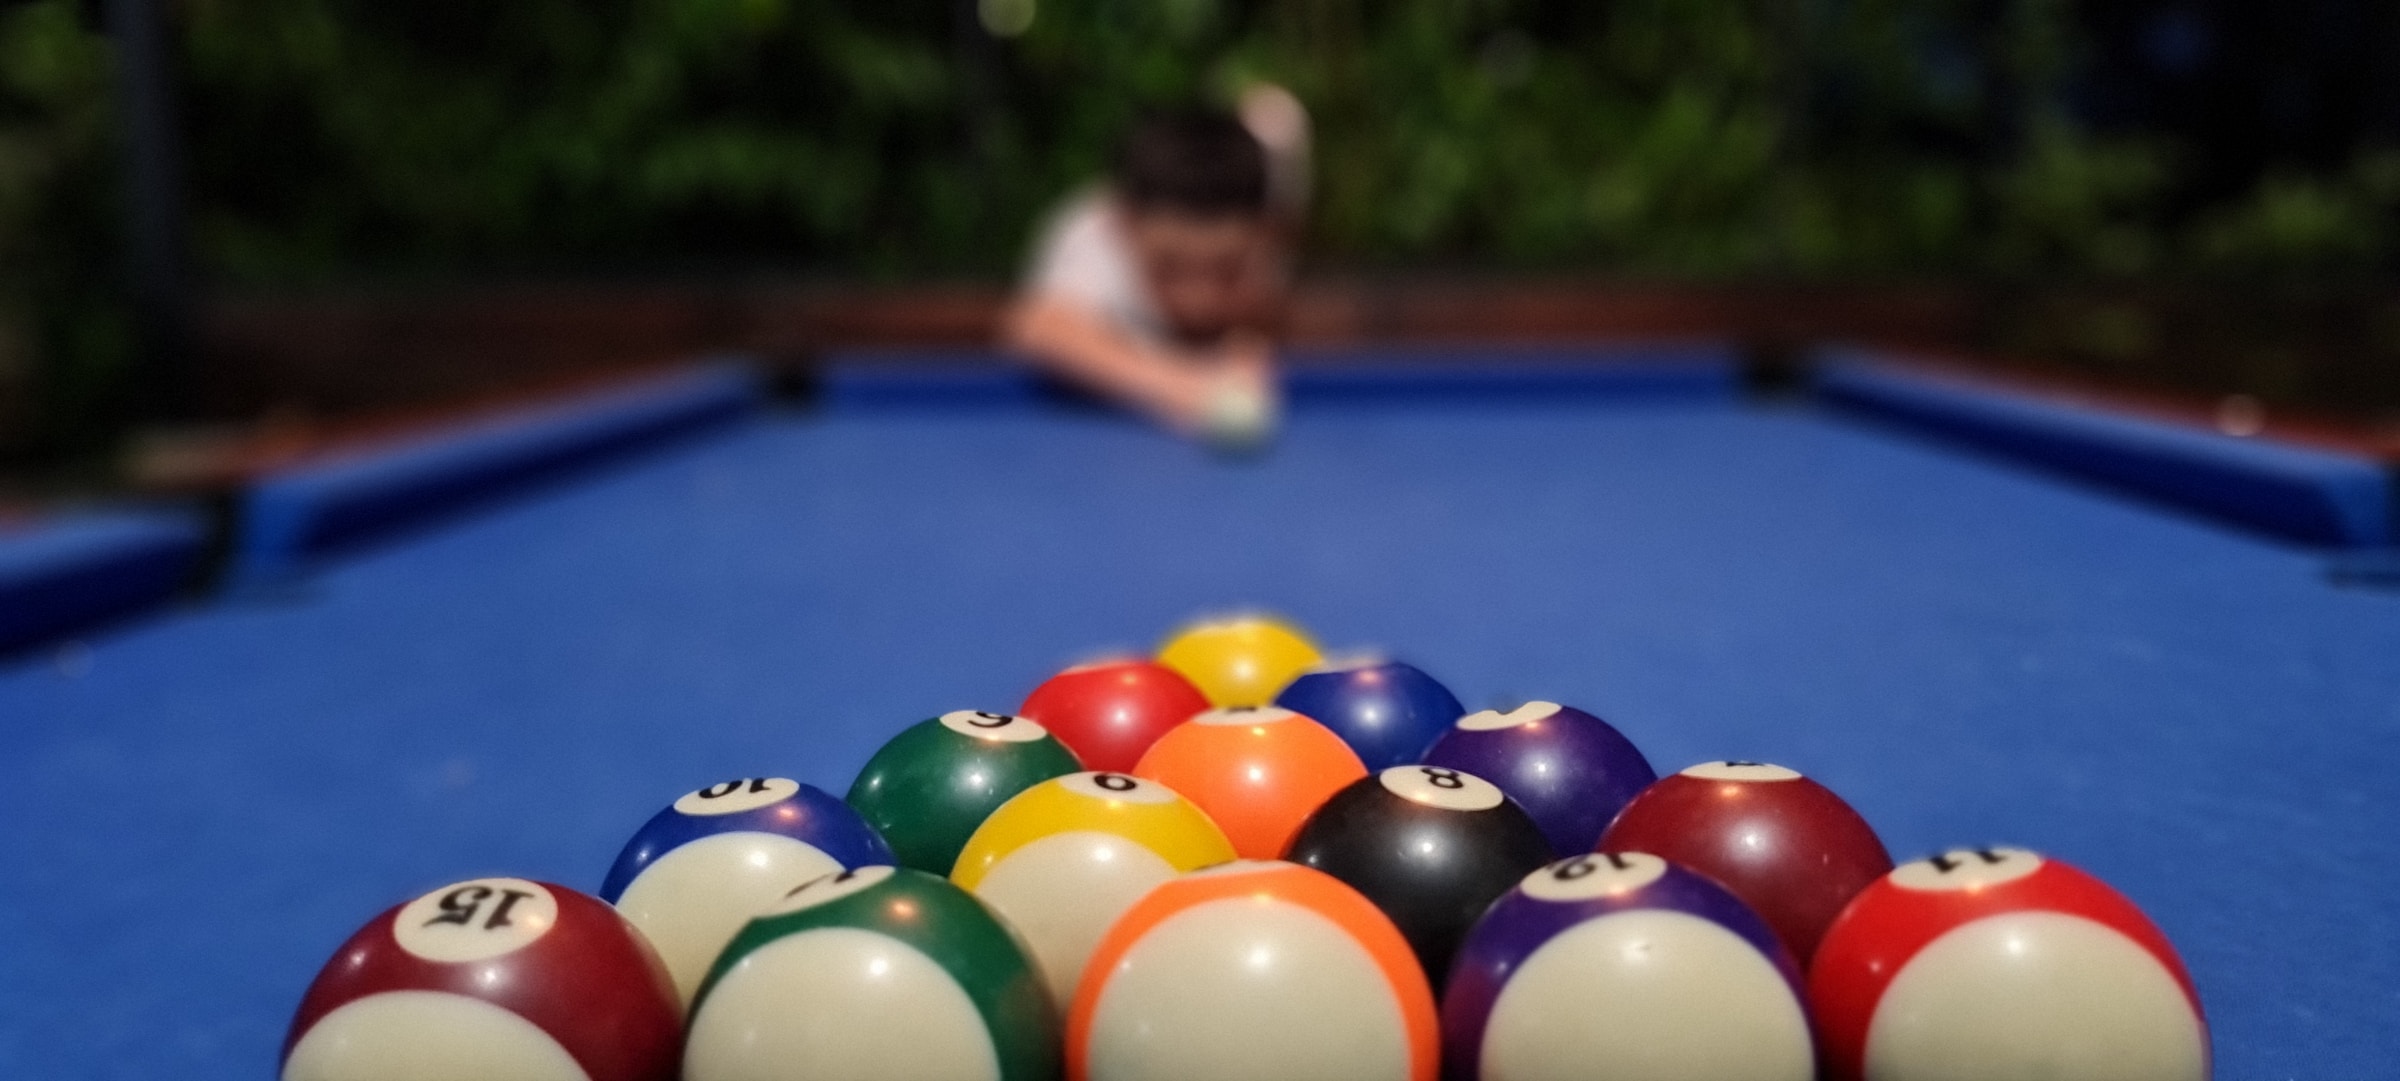 A billiards player is preparing to strike the cue ball on a small pool table.